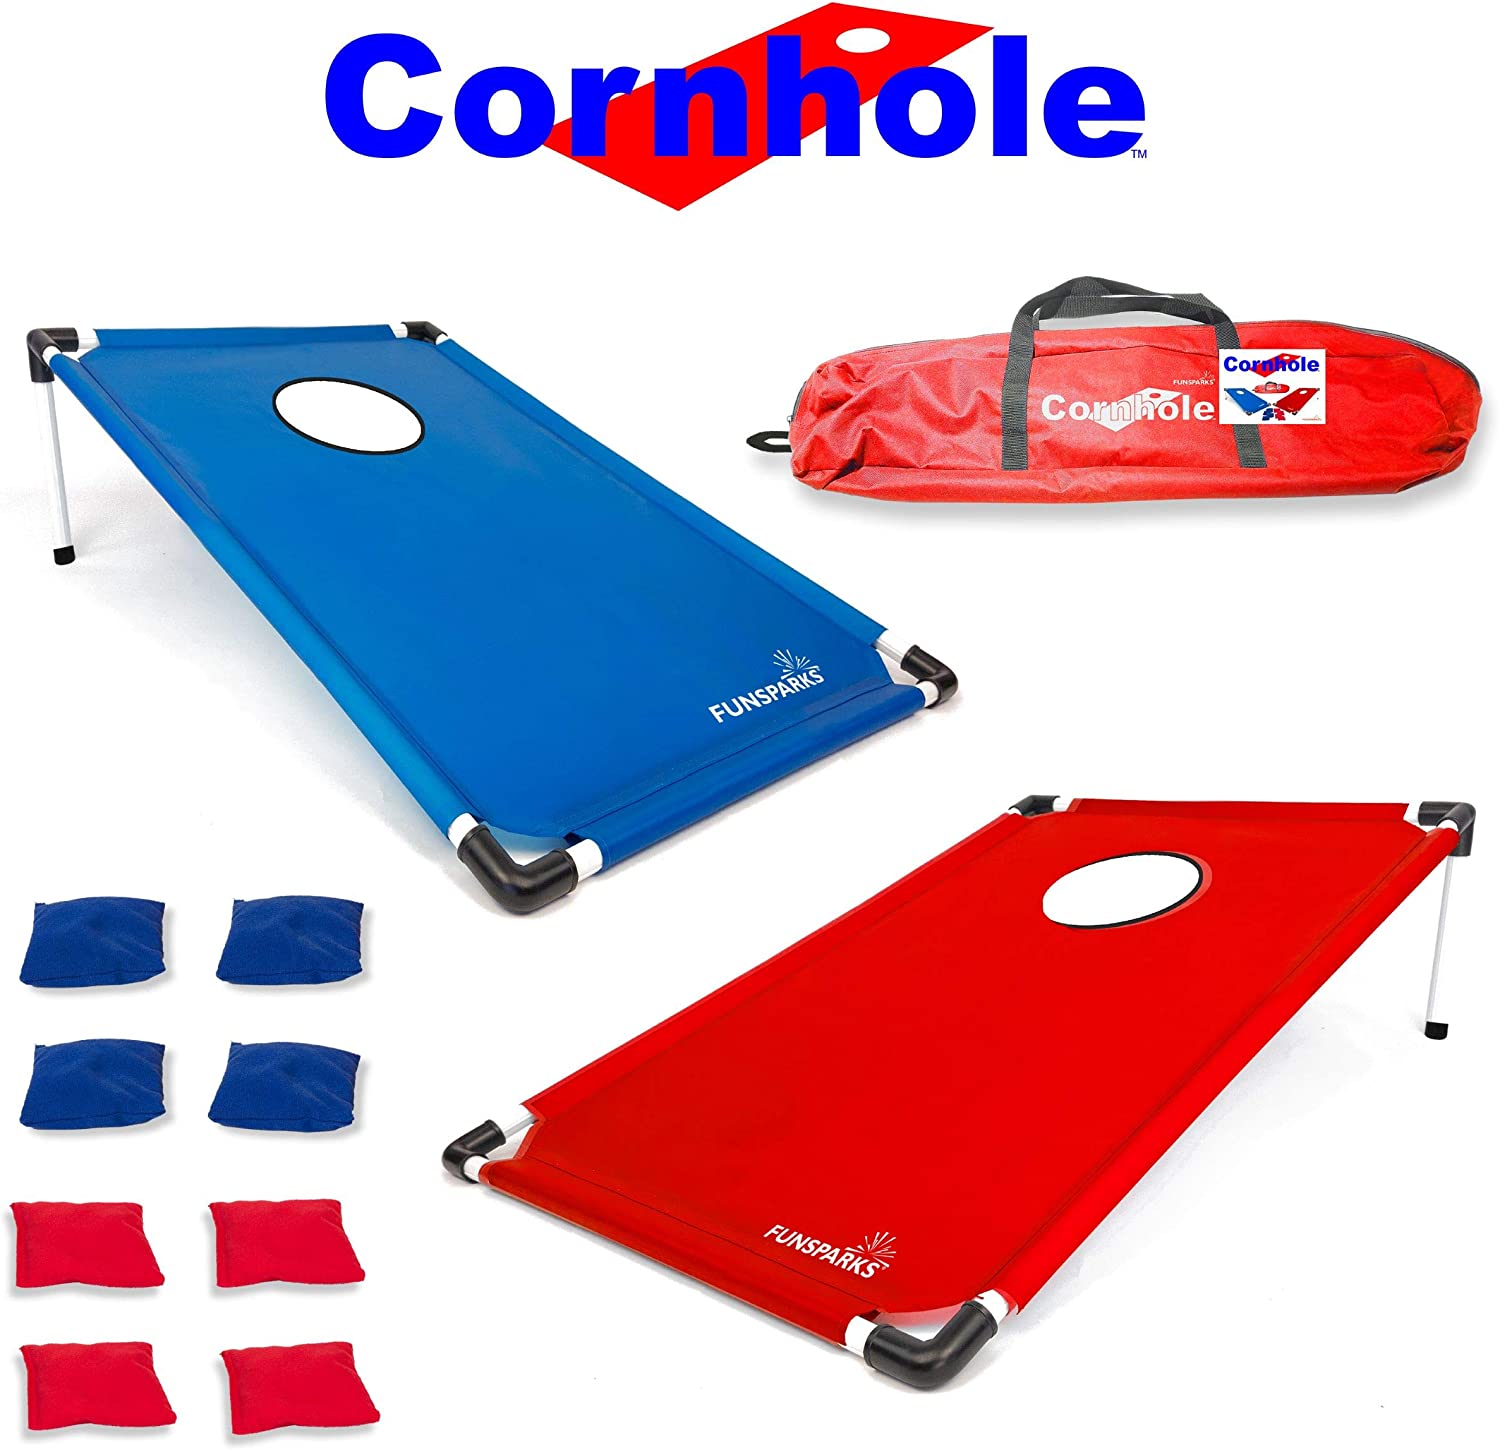 Cornhole comes with 4 red and 4 blue bean bags for play, a carry bag and rules